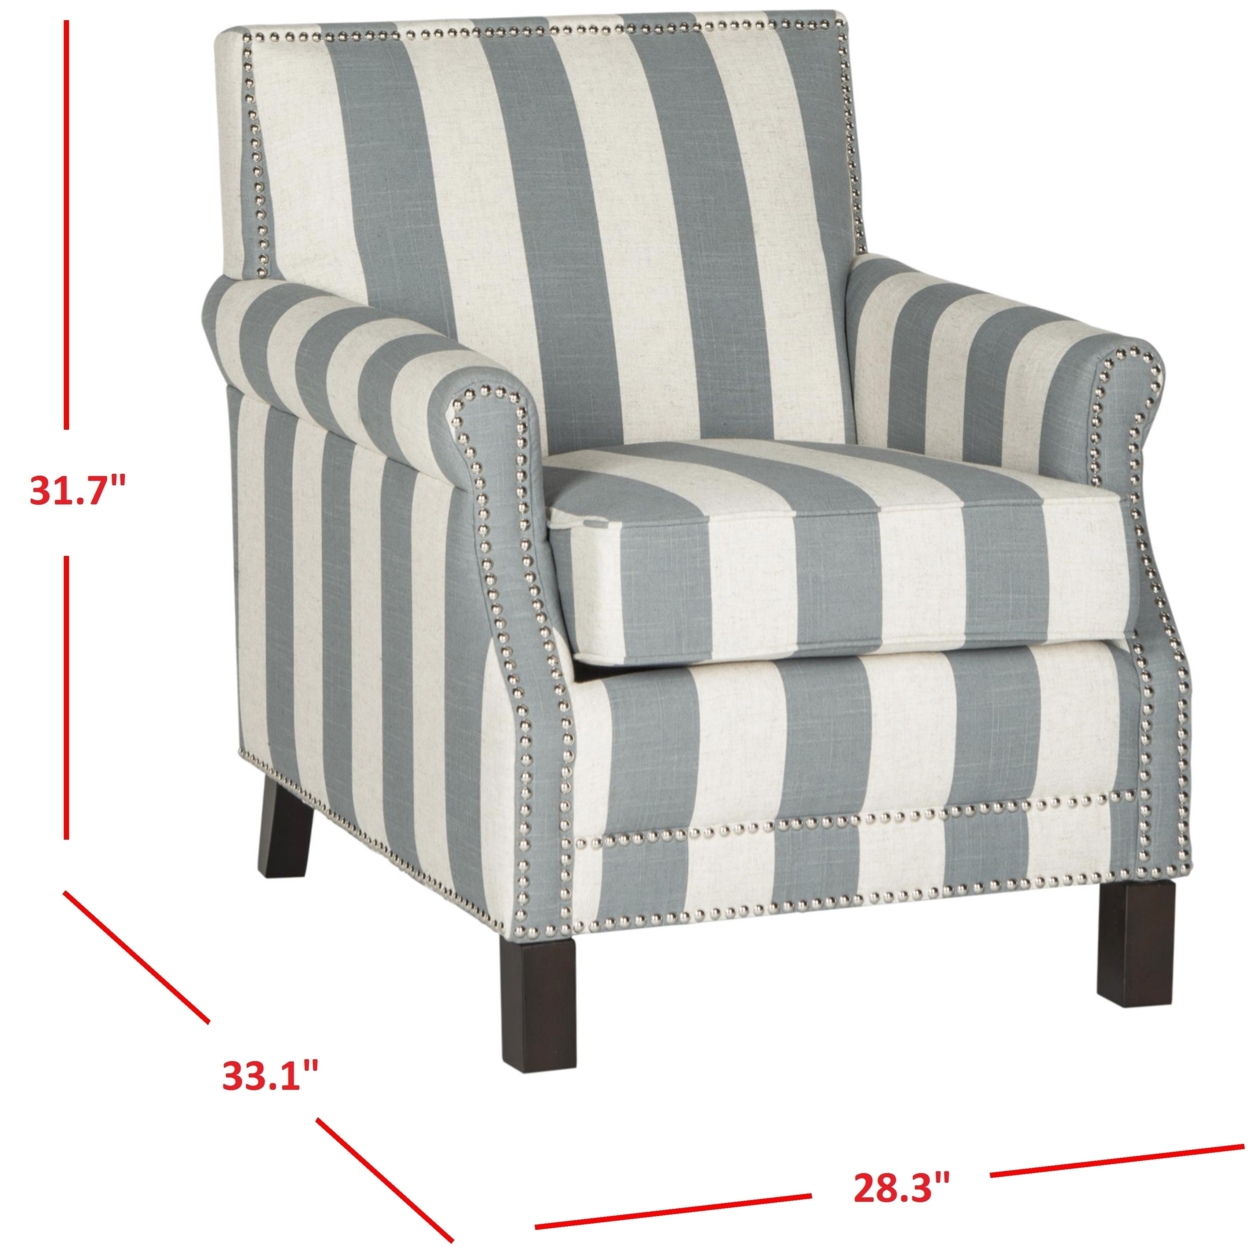 SAFAVIEH Easton Rustic Glam Upholstered Club Chair w/ Nailheads, Grey/White - image 3 of 5